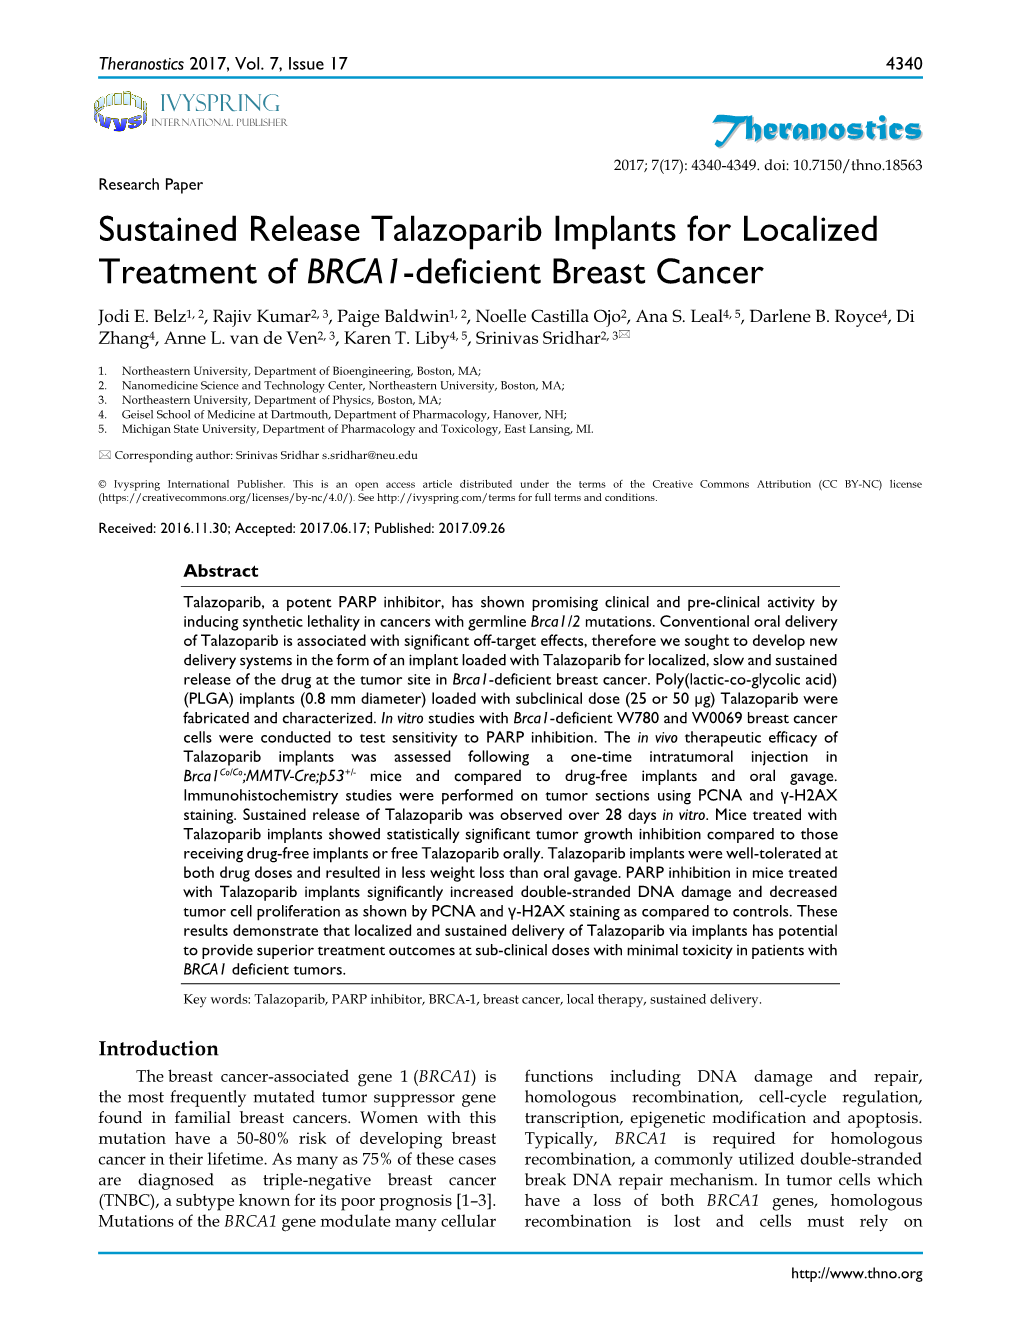 Sustained Release Talazoparib Implants for Localized Treatment of BRCA1-Deficient Breast Cancer Jodi E